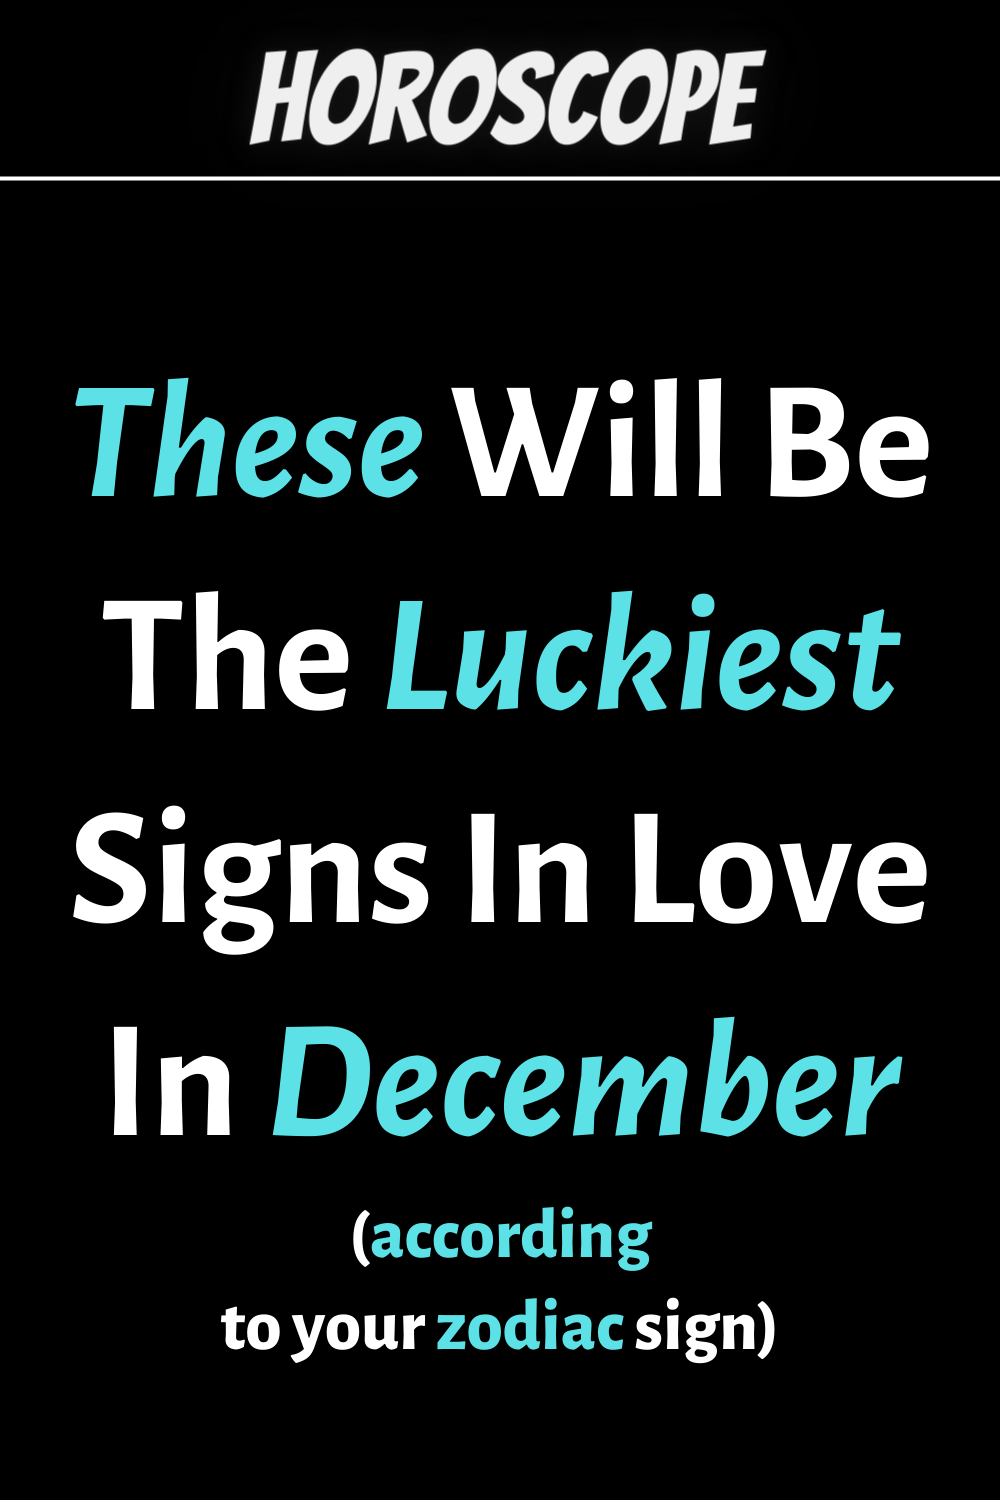 These Will Be The Luckiest Signs In Love In December According To Eastern Astrology